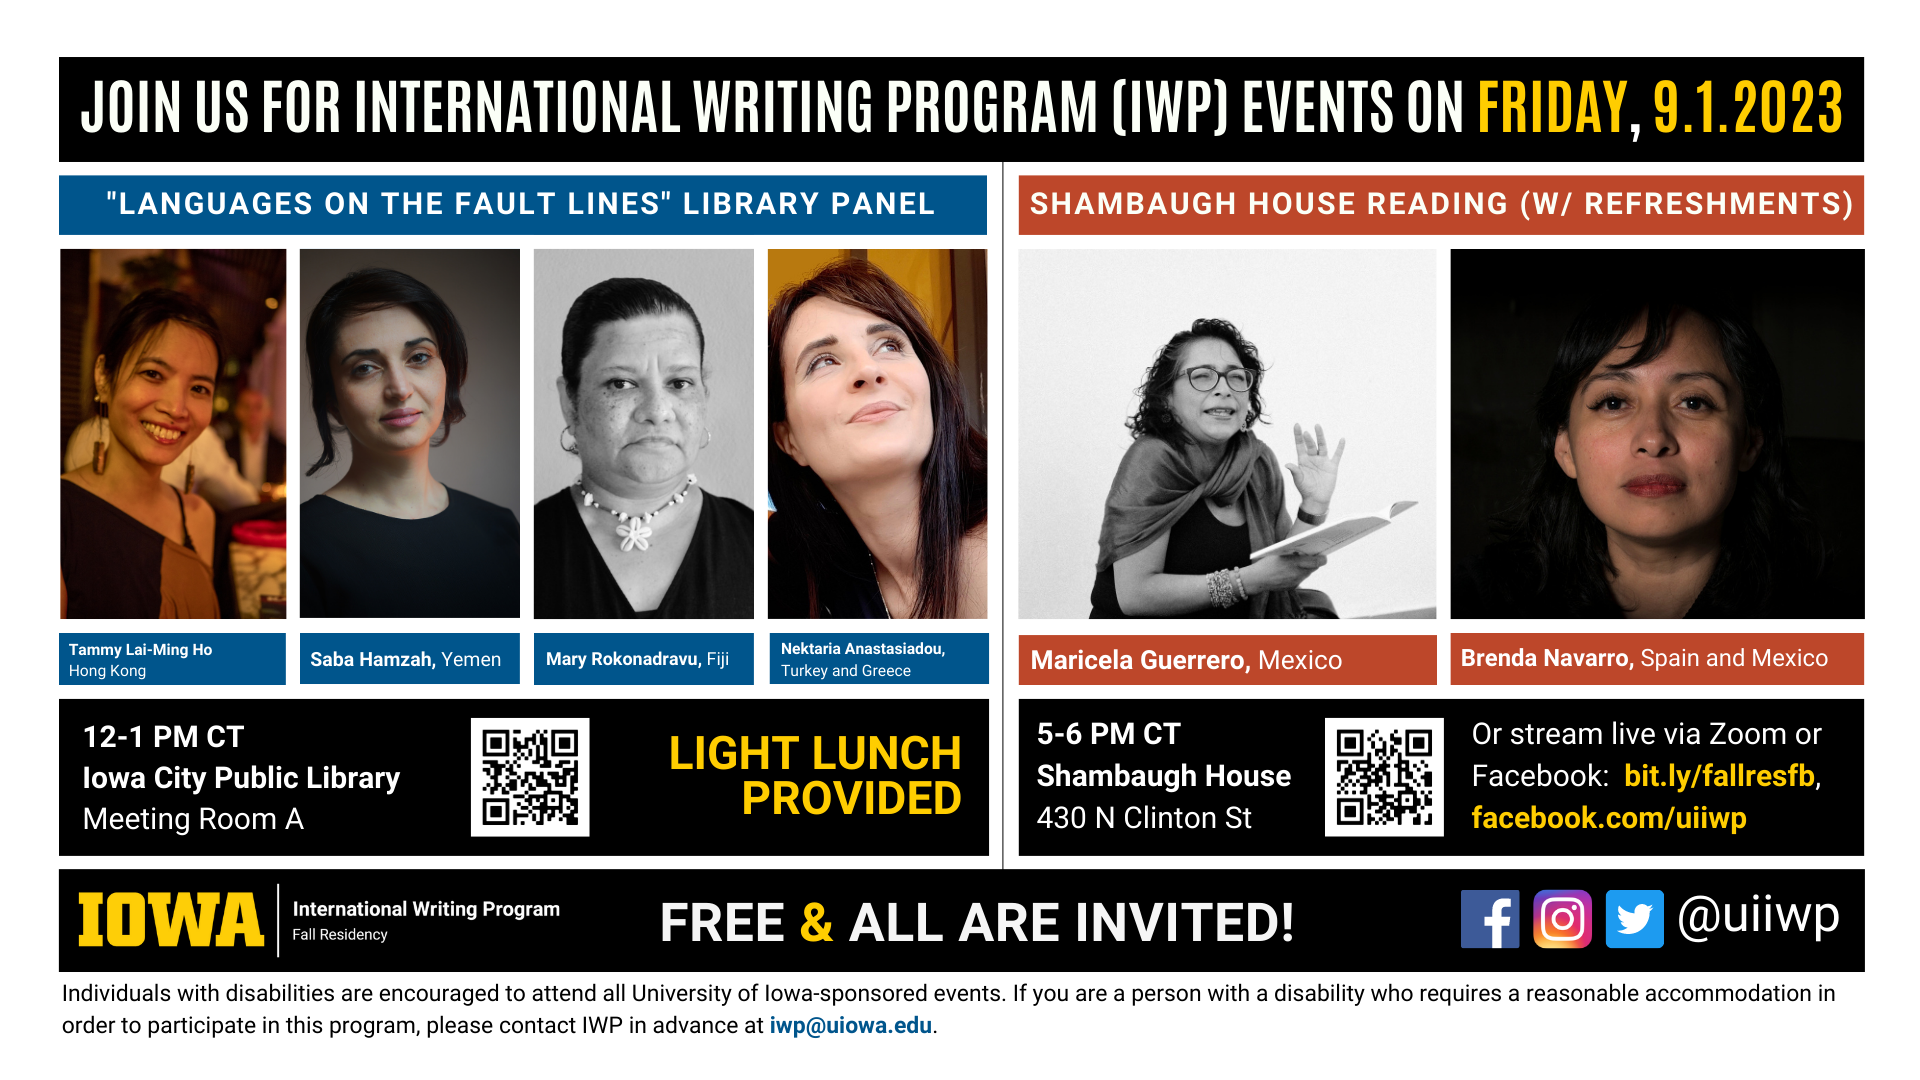 An image with two halves, each advertising one event. The image as a whole is labeled “Join us for International Writing Program (IWP) events on Friday, 9.1.2023.” The left half of the image is labeled, “‘Languages on the Fault Lines’ Library Panel.” There are portraits of four writers (named below) and the following text: "Tammy Lai-Ming Ho, Hong Kong. Saba Hamzah, Yemen. Mary Rokonadravu, Fiji. Nektaria Anastasiadou, Turkey and Greece. 12-1 PM CT, Iowa City Public Library, Meeting Room A. Light lunch provided." The right half of the image is labeled “Shambaugh House Reading (W/ Refreshments.)” It features portraits of two writers (named below) and the following text: "Maricela Guerrero, Mexico. Brenda Navarro, Spain and Mexico. 5-6 PM CT, Shambaugh House, 430 N. Clinton St. Or stream live via Zoom or Facebook: bit.ly/fallresfb, facebook.com/uiiwp.” Below that text there are the IWP Fall Residency logo, the Instagram, Facebook, and Twitter handle @uiiwp, and a note that the event is “Free & All Are Invited.” The following text is at the bottom of the image: "Individuals with disabilities are encouraged to attend all University of Iowa-sponsored events. If you are a person with a disability who requires a reasonable accommodation in order to participate in this program, please contact IWP in advance at iwp@uiowa.edu.”